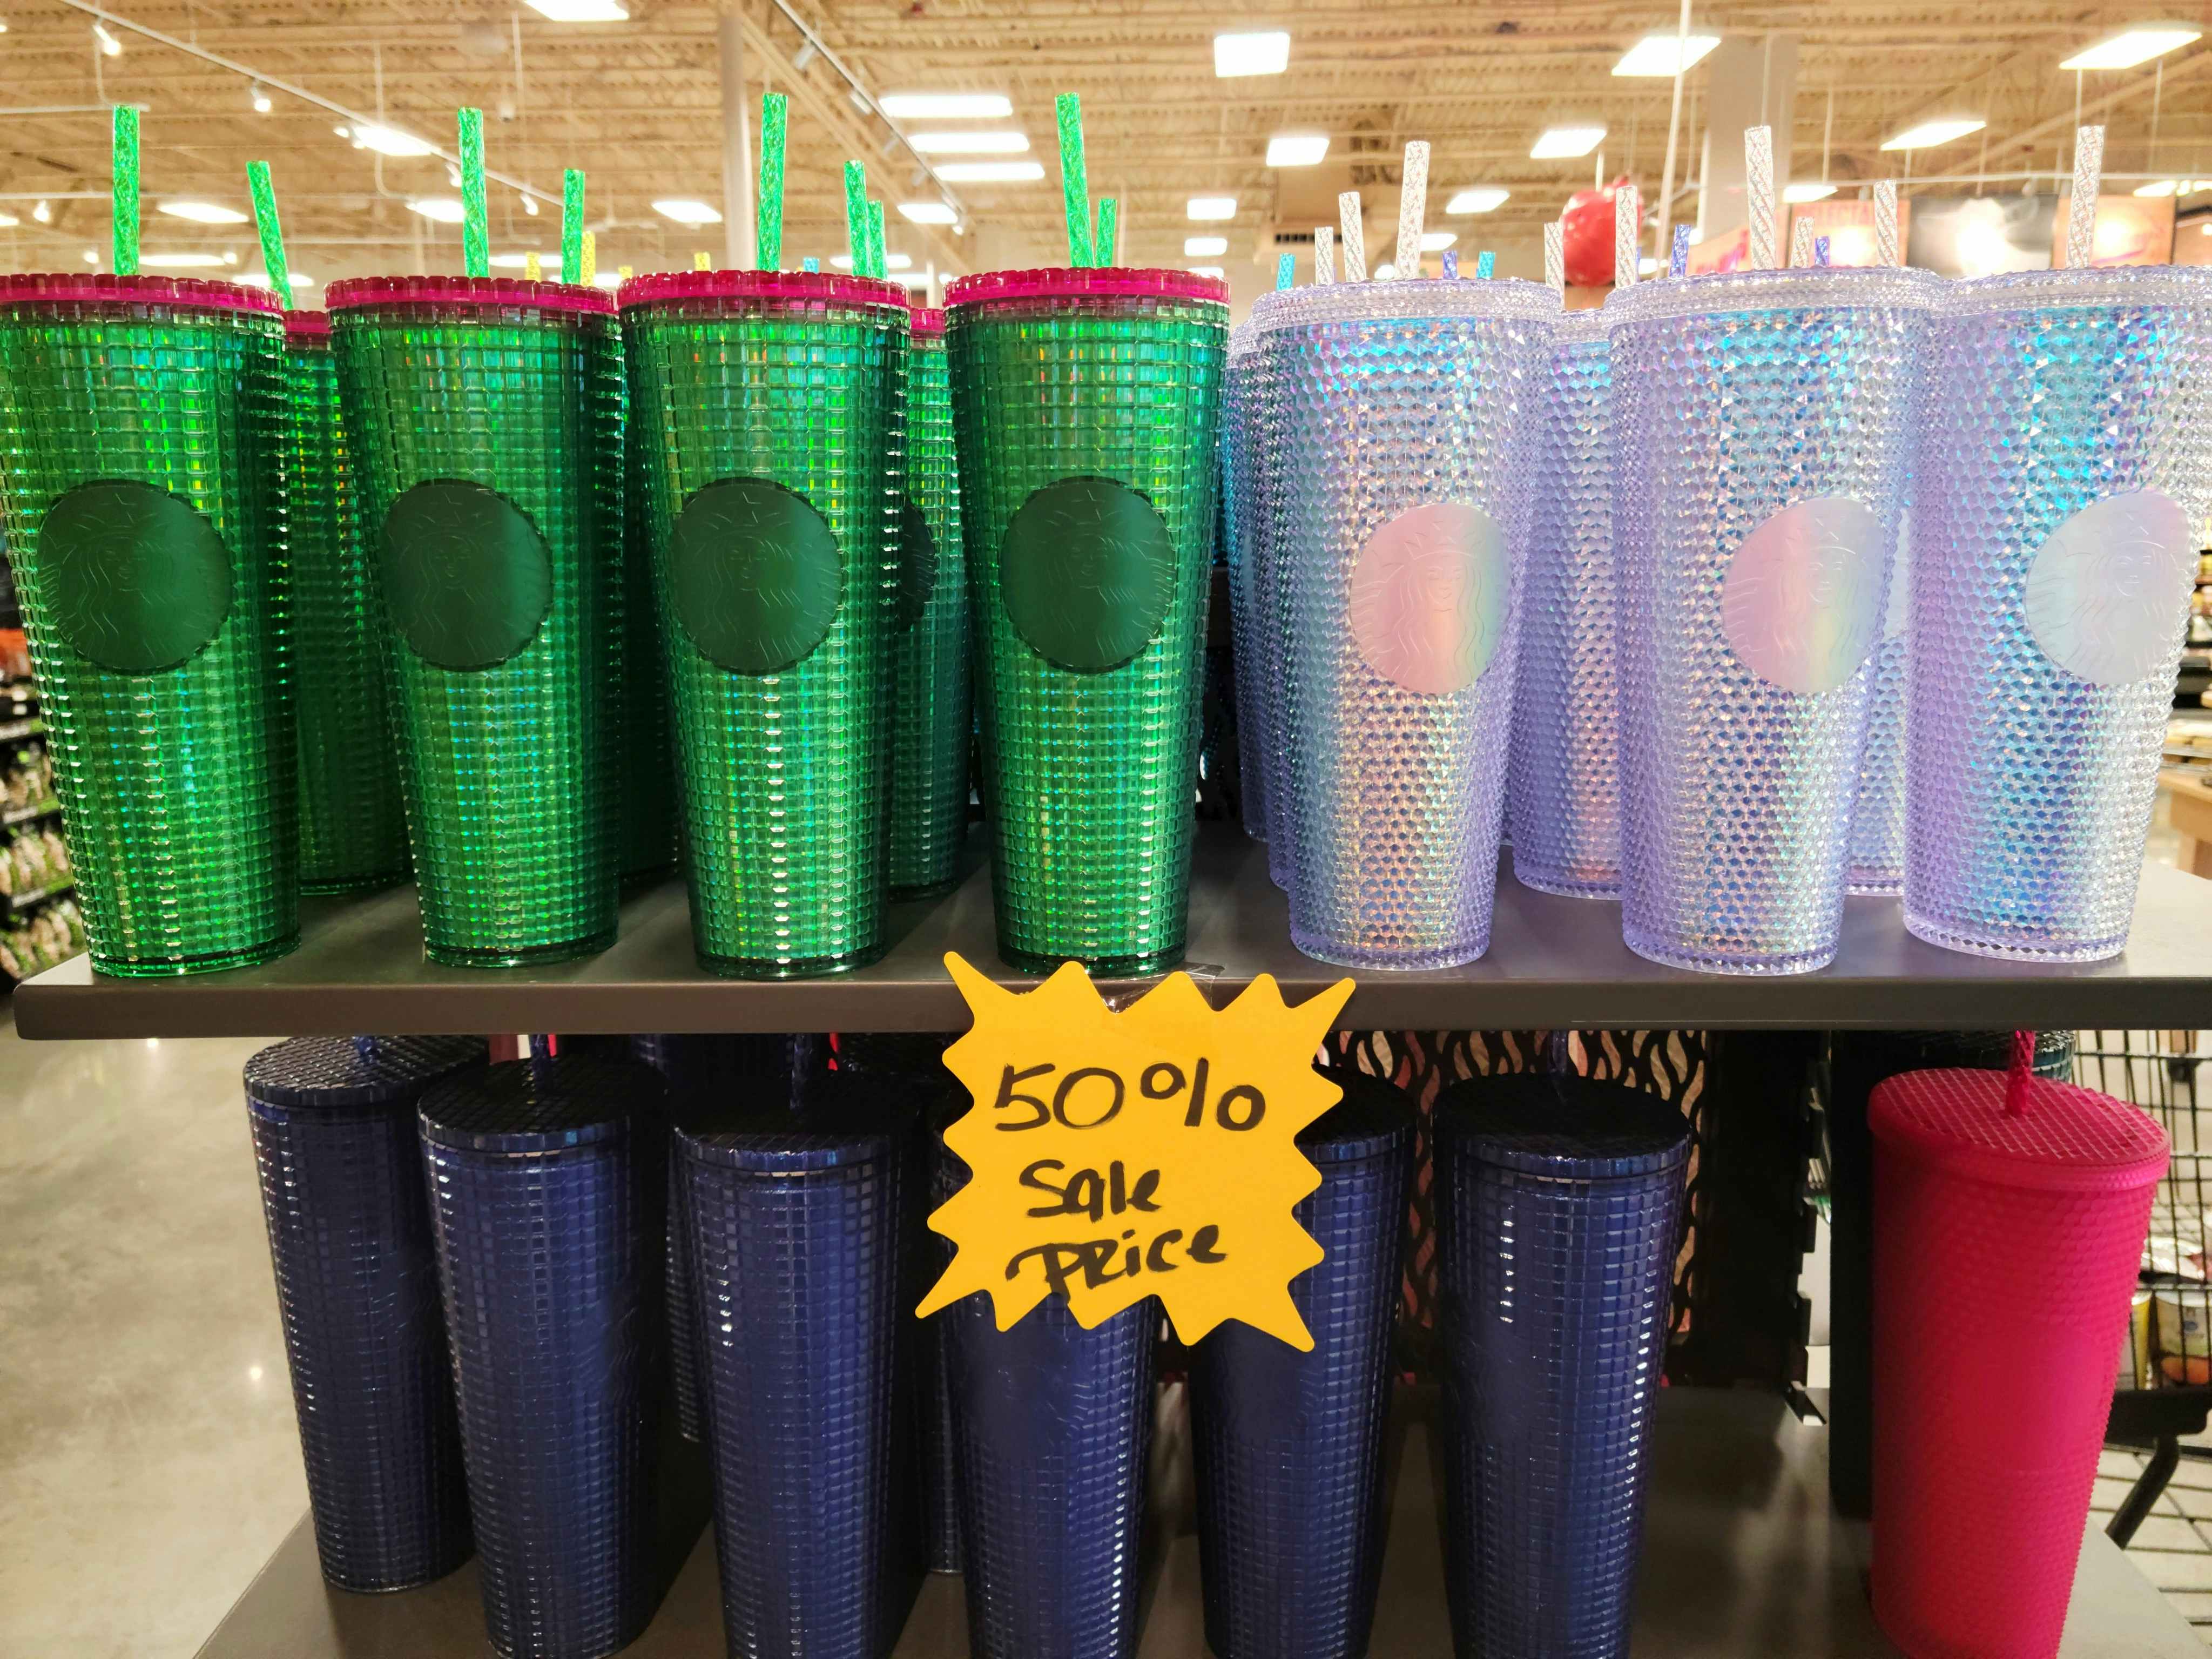 Starbucks' slime-dripping tumbler is beginning to arrive at the